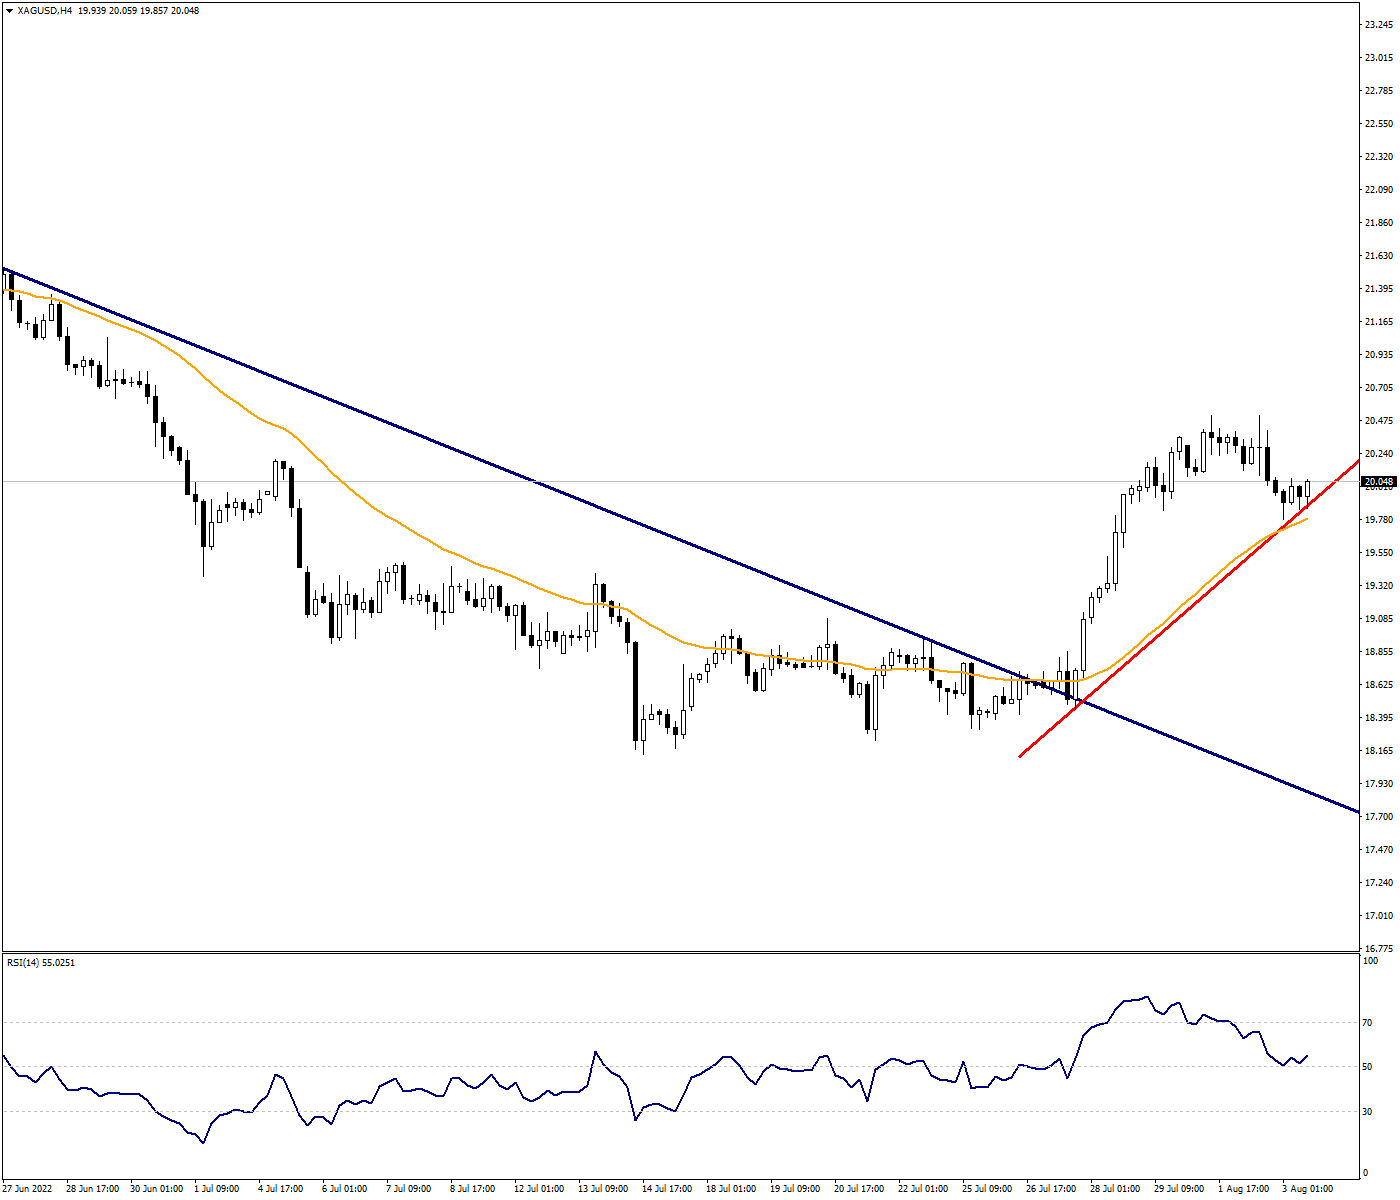 XAGUSD: Political Tension Pricing Continues in Silver